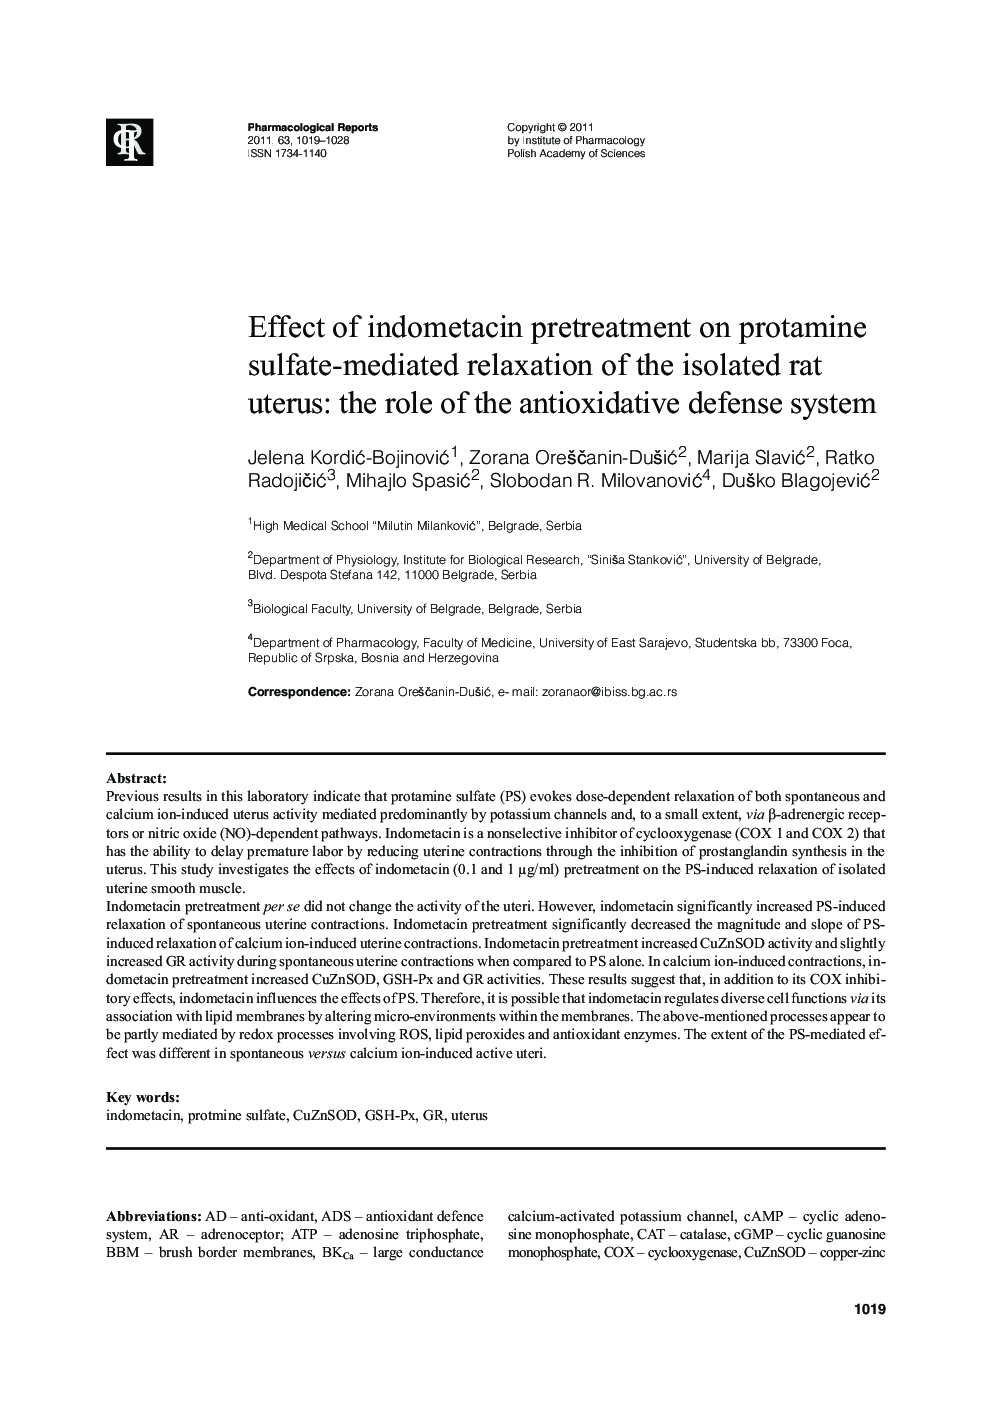 Effect of indometacin pretreatment on protamine sulfate-mediated relaxation of the isolated rat uterus: the role of the antioxidative defense system